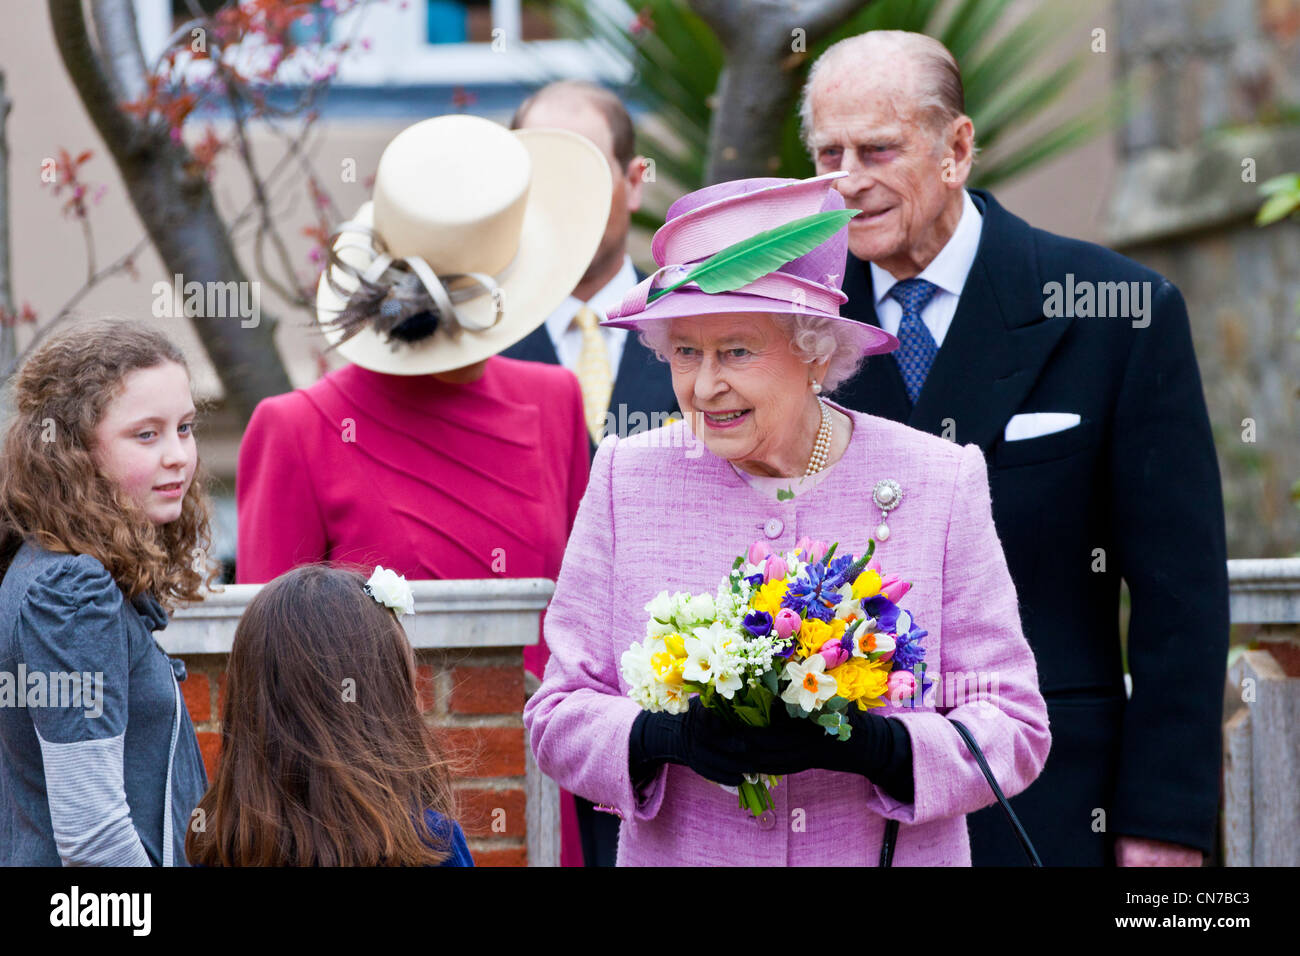 Her Majesty Queen Elizabeth II and the Duke of Edinburgh at the Dean of Windsor's House, Windsor Castle, Easter 2012. PER0153 Stock Photo